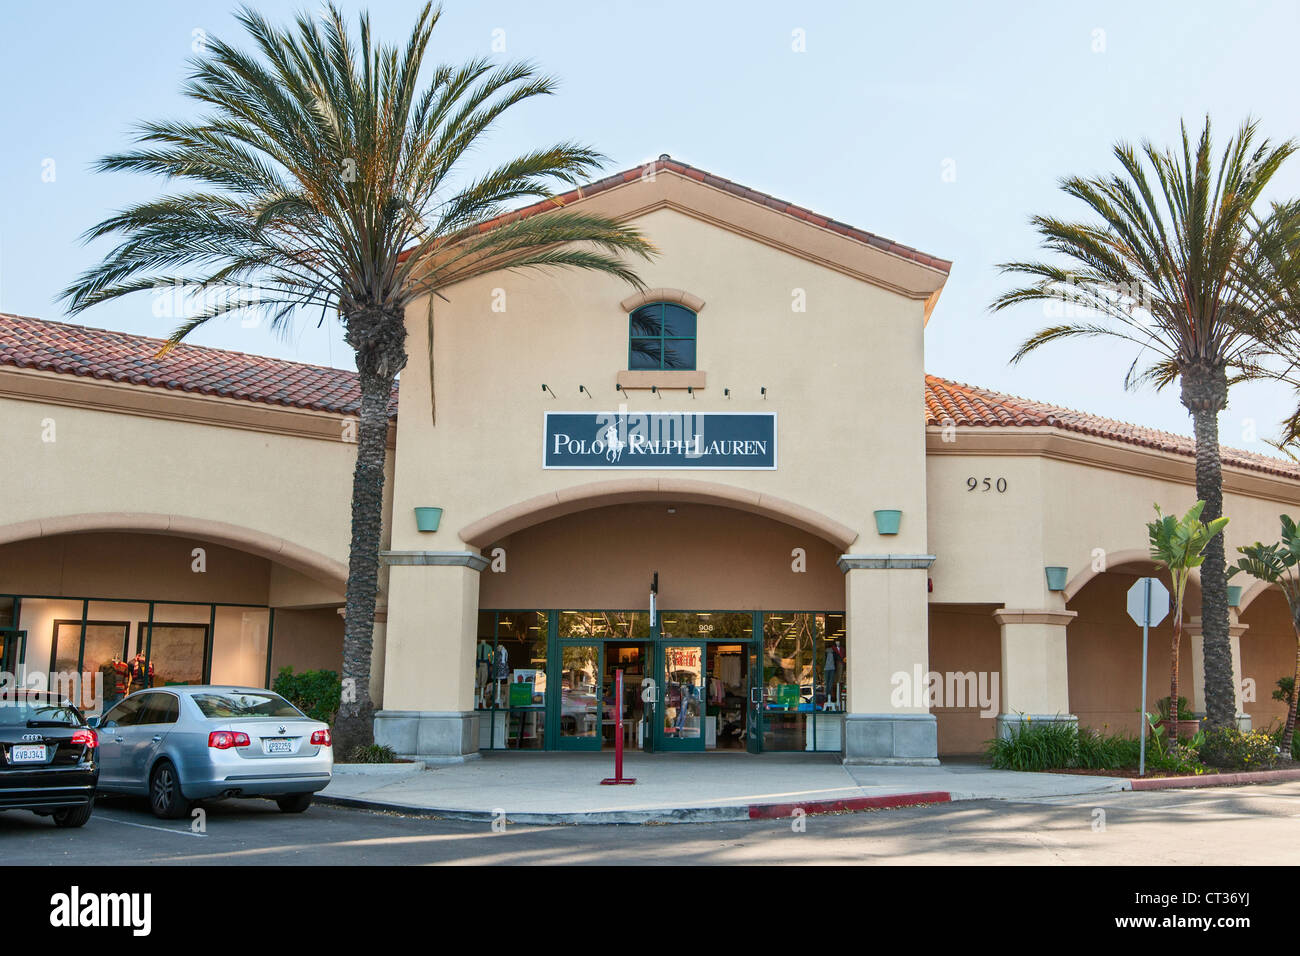 Stores at the Camarillo Premium Outlets Stock Photo: 49243814 - Alamy